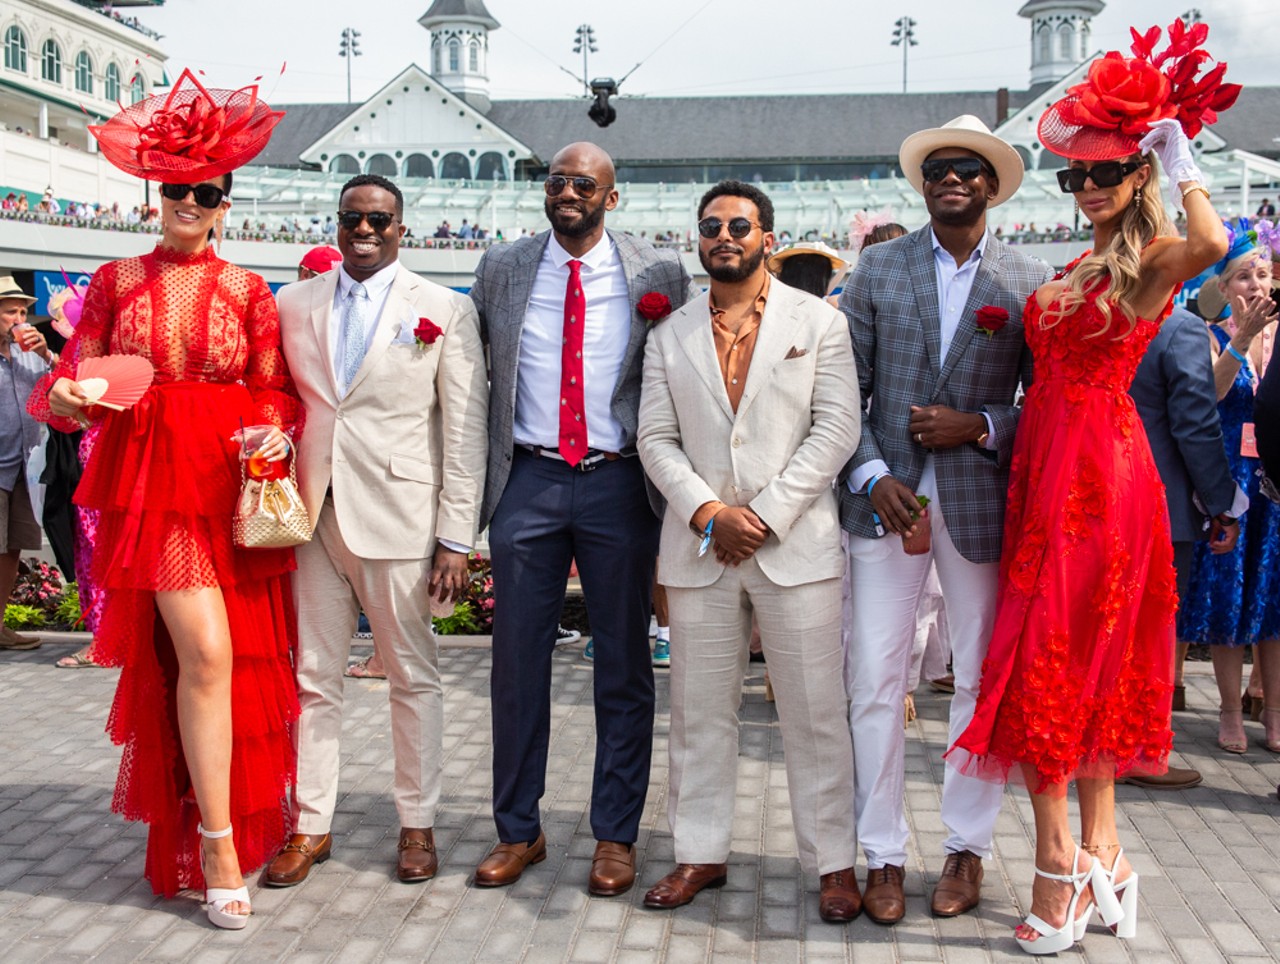 PHOTOS: All The Revelry And Rain We Saw At The 150th Kentucky Derby And Oaks